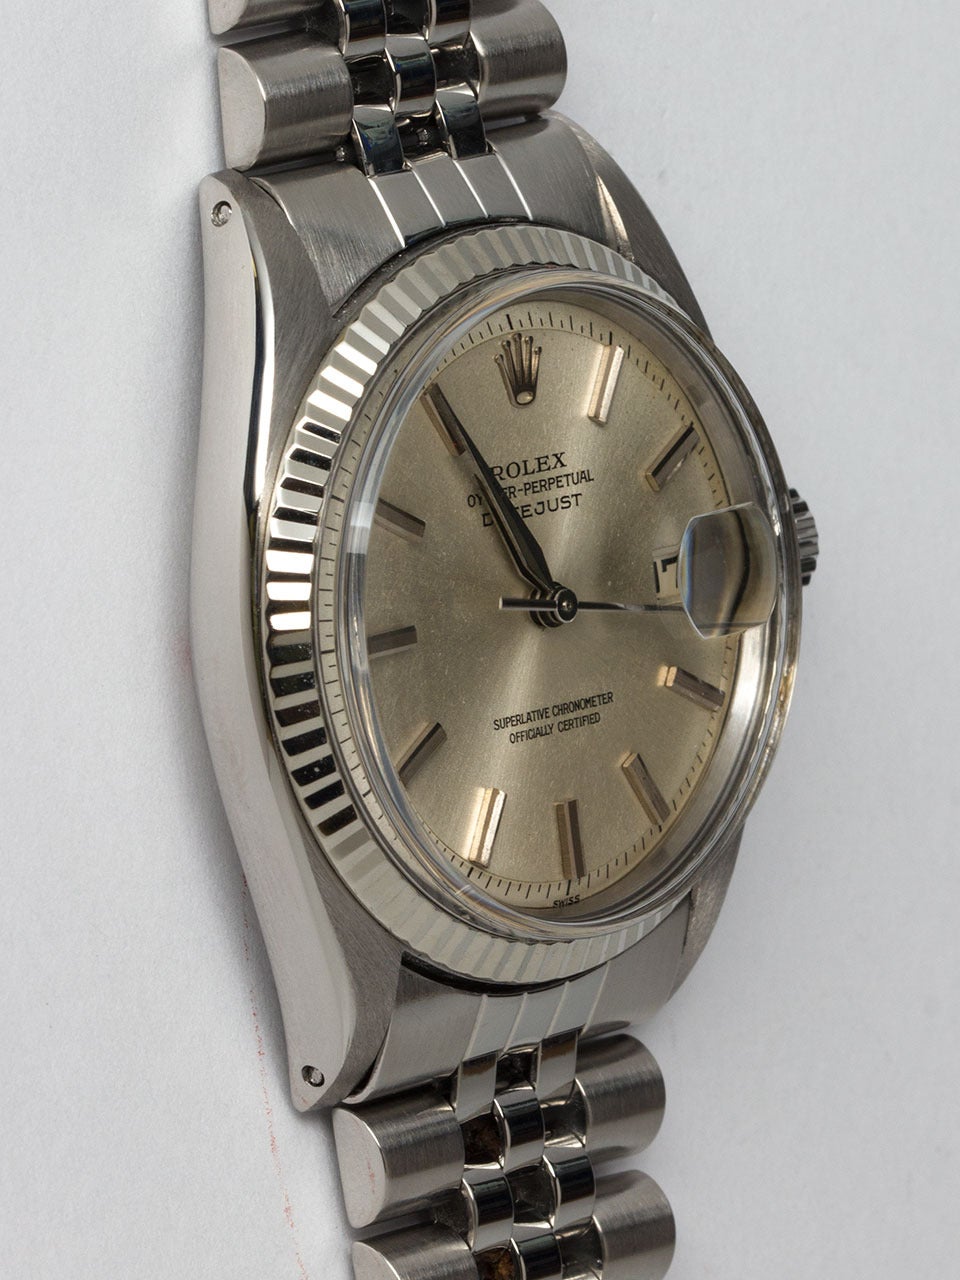 Rolex Stainless Steel Datejust ref 1601 circa 1970's. 36mm diameter full size man's model with 14K white gold fluted bezel and acrylic crystal. Original silvered satin pie pan dial with applied silver indexes and tapered silver hands. Powered by